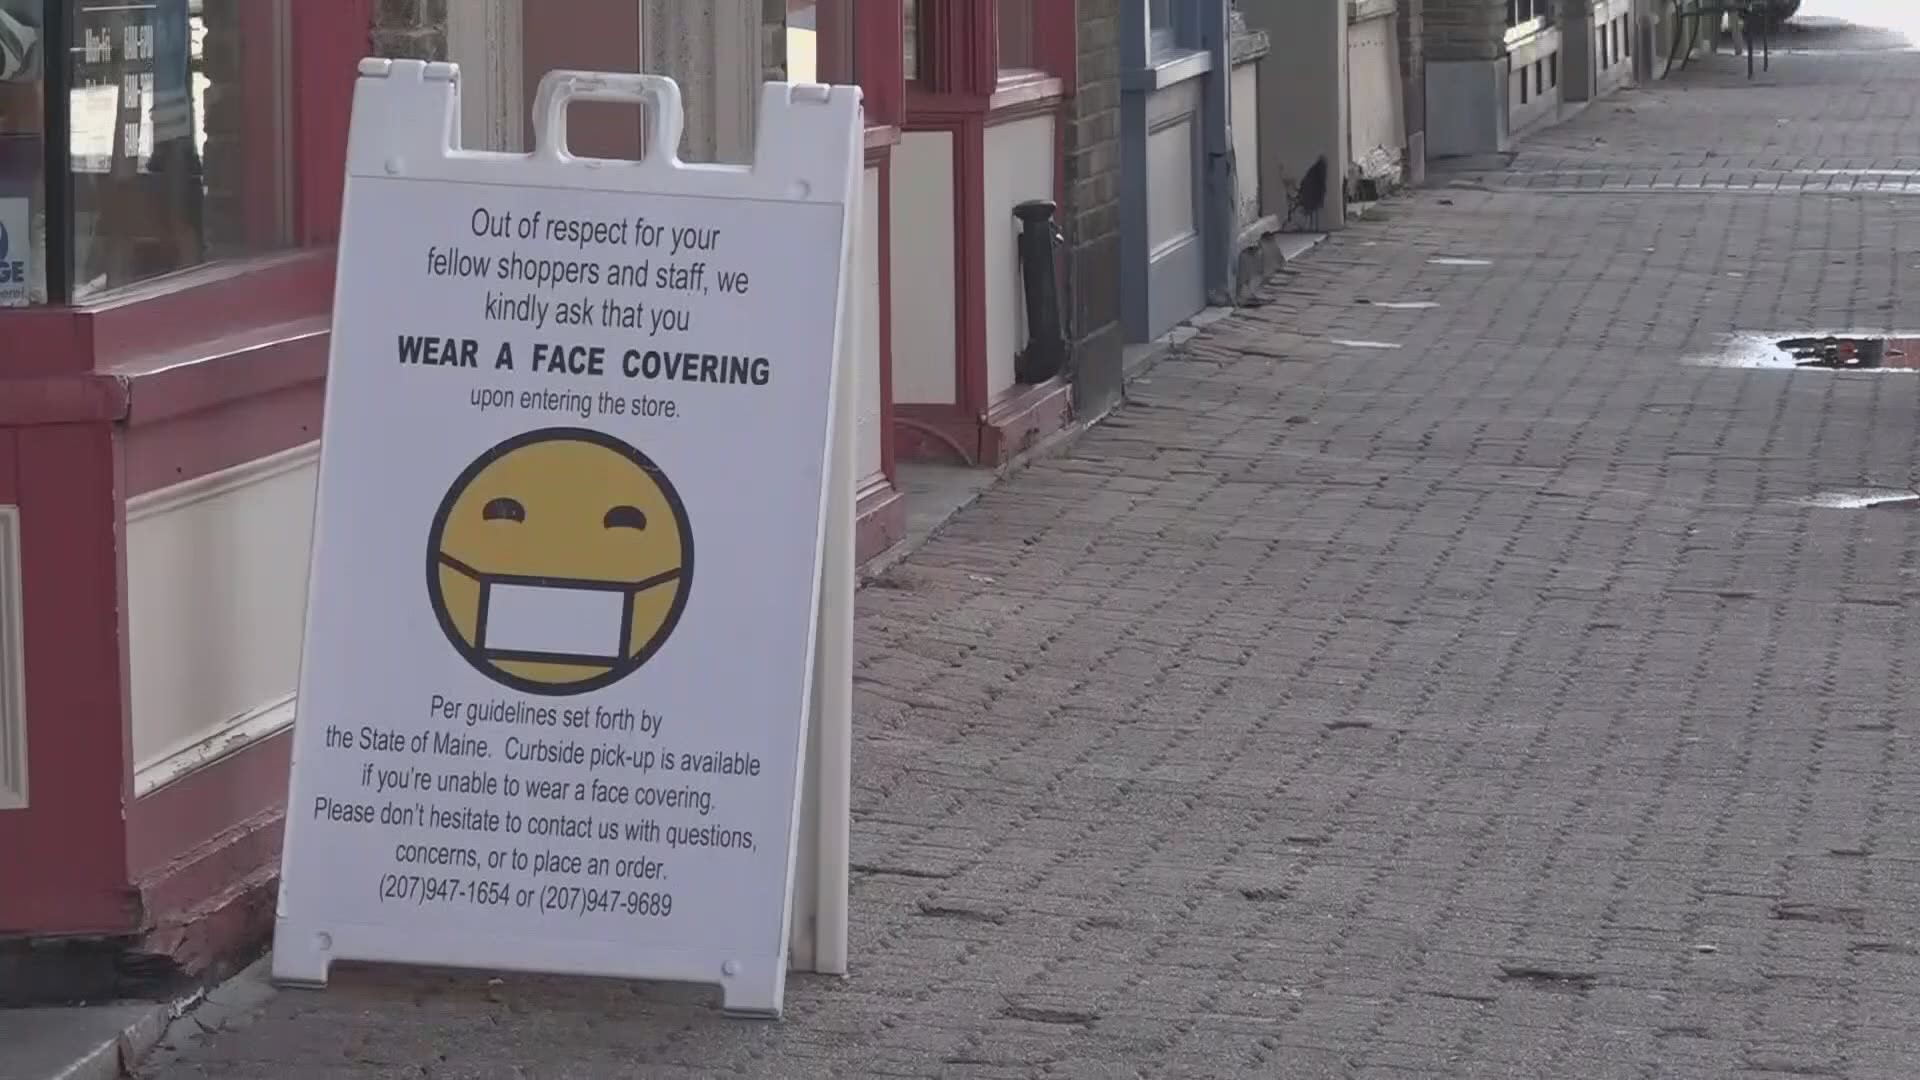 Some local businesses owners say they are concerned about their employees having to deal with people who refuse to wear a mask.